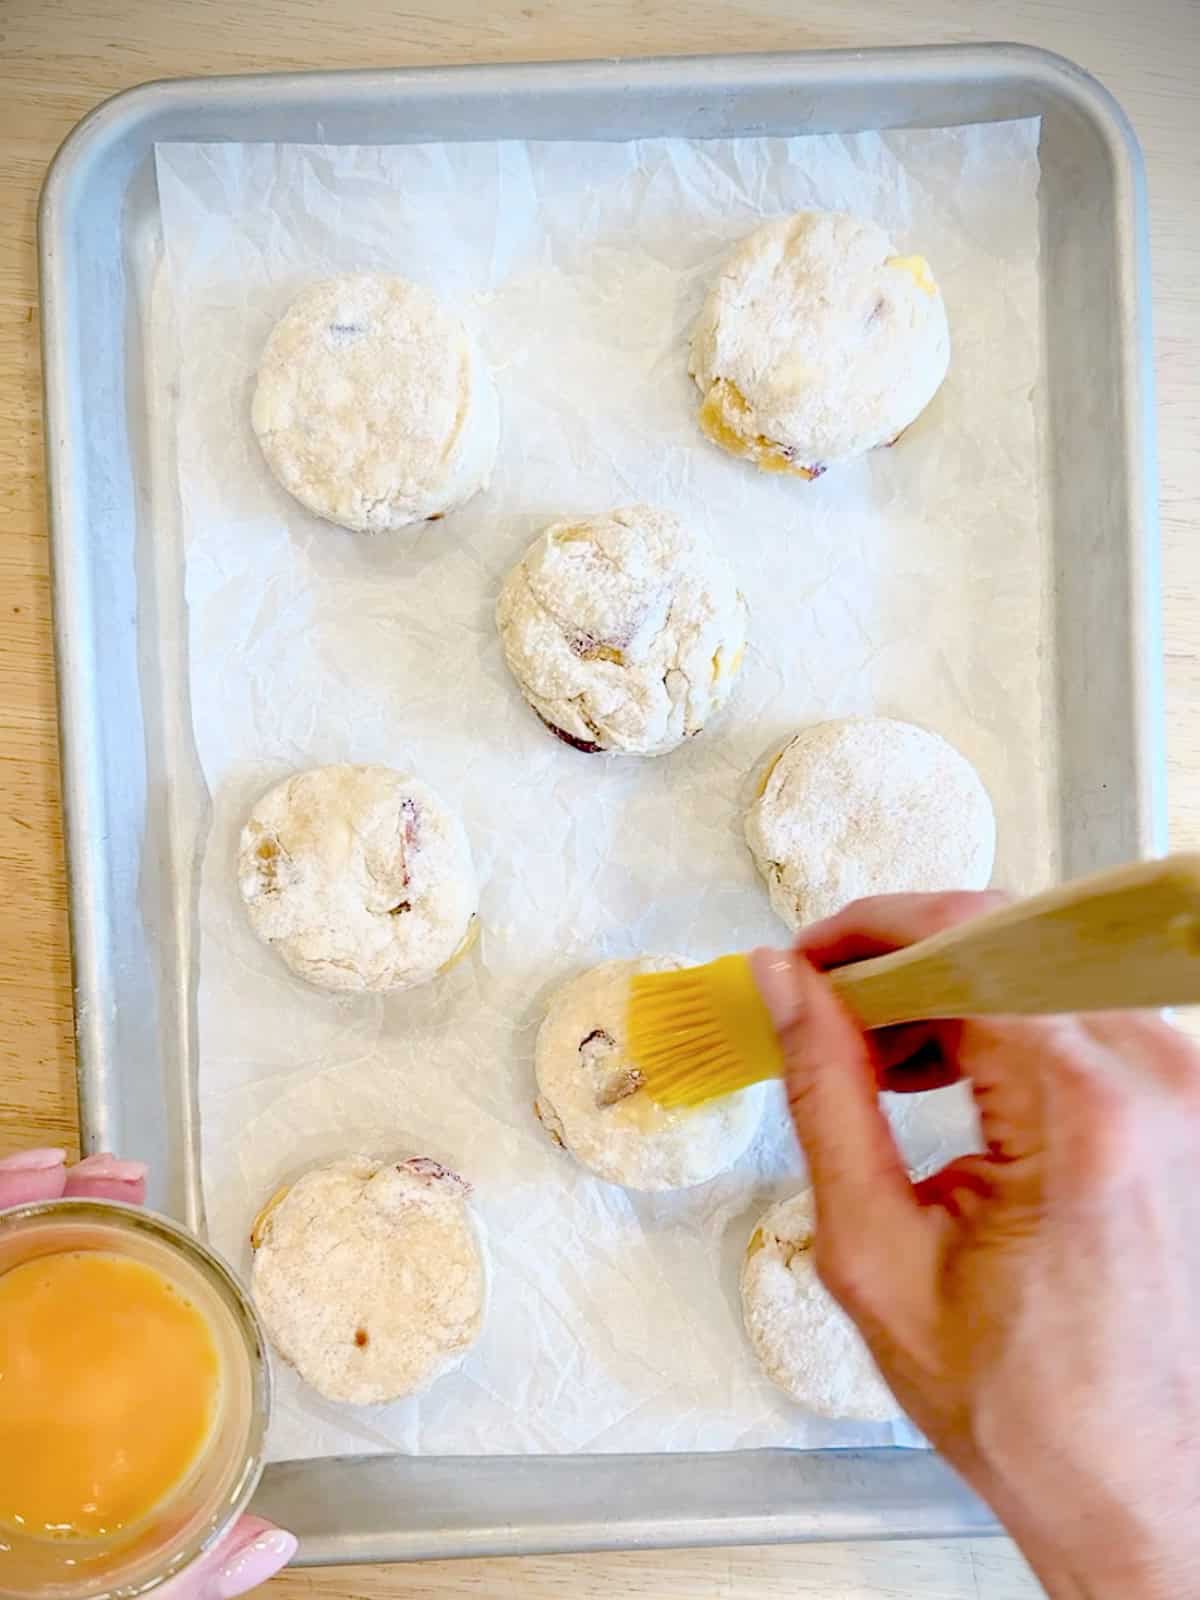 Brushing peach Biscuits with an egg wash.